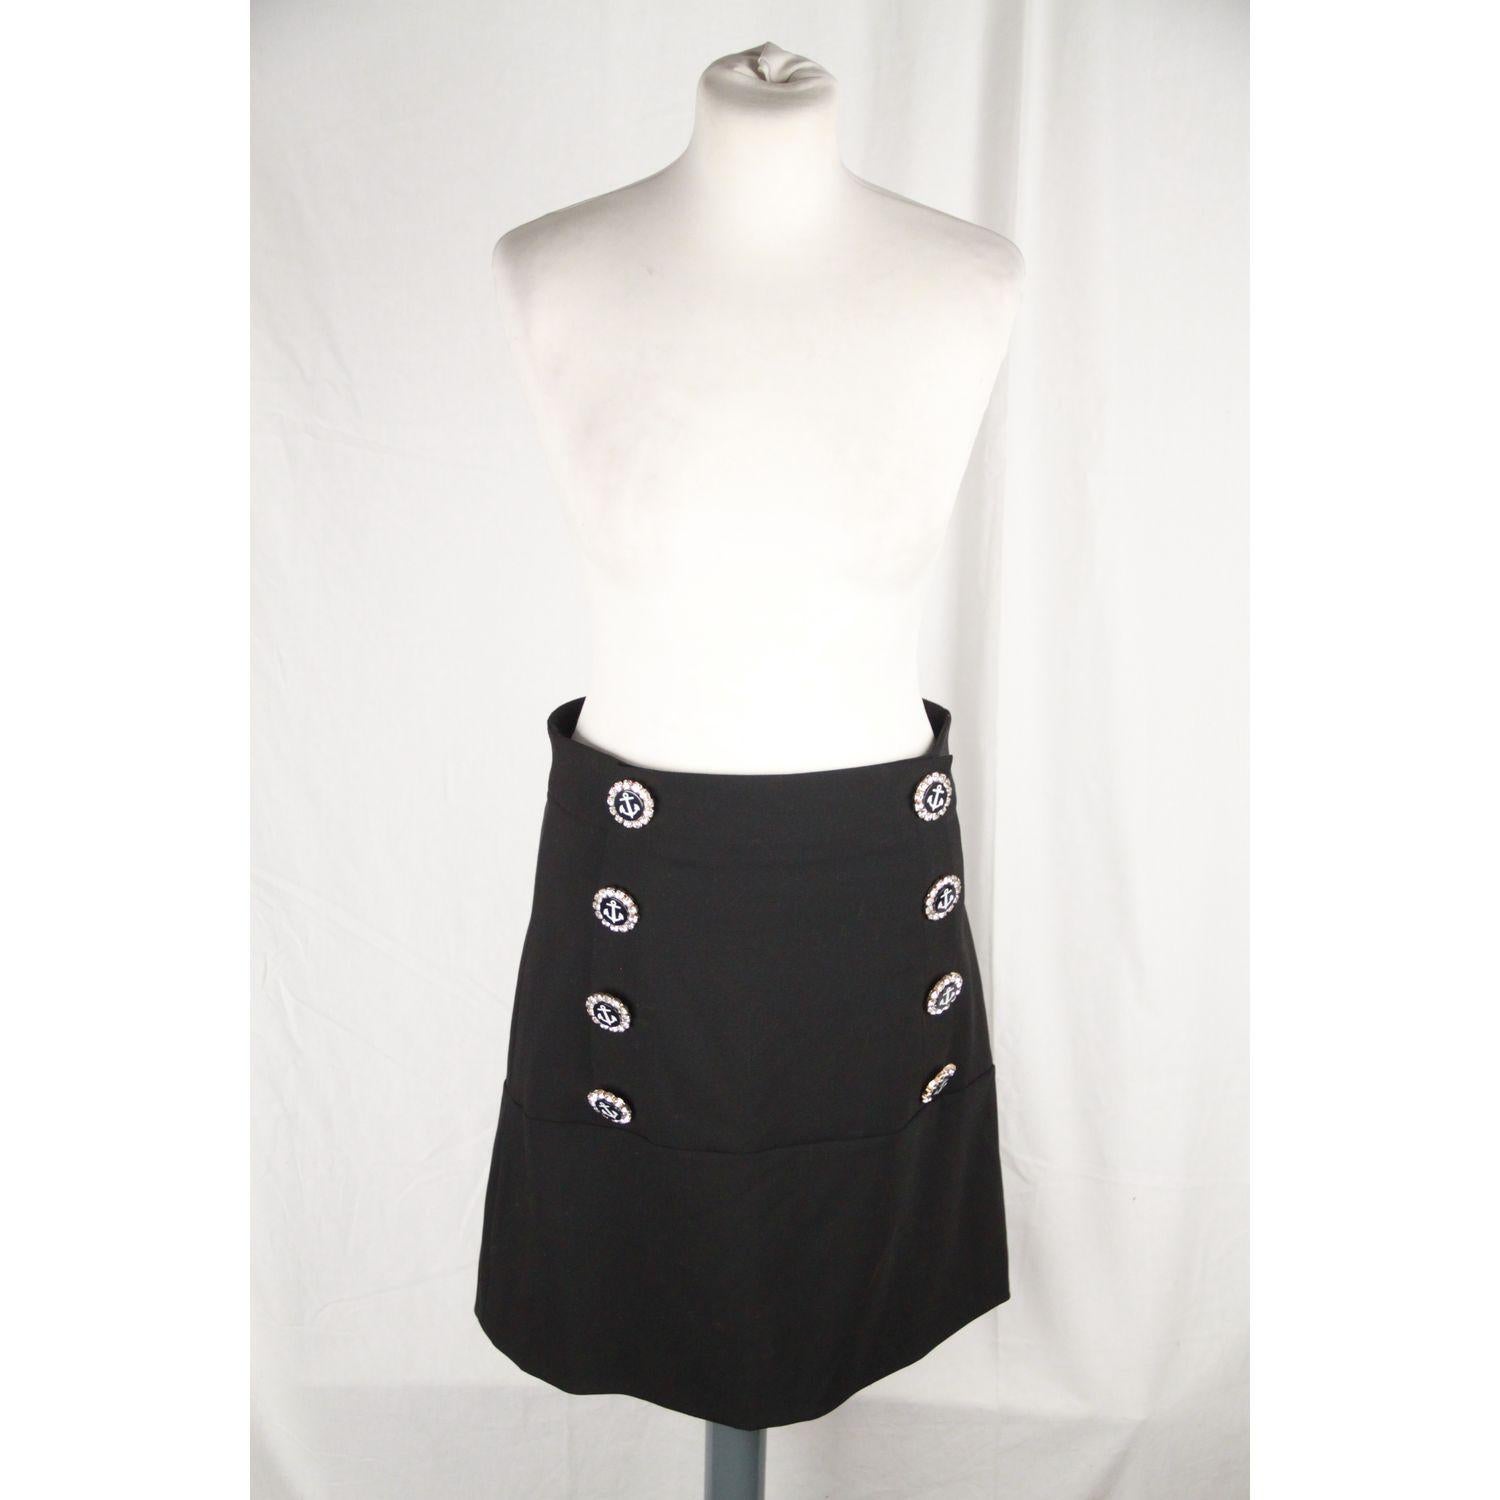 Black wool-blend - Concealed hook and zip fastening at back - 99% wool, 1% elastane - Dry clean - Made in Italy - Dolce & Gabbana's skirt playfully nods to sailor uniforms with its crystal-embellished anchor buttons that frame the hips - It's cut